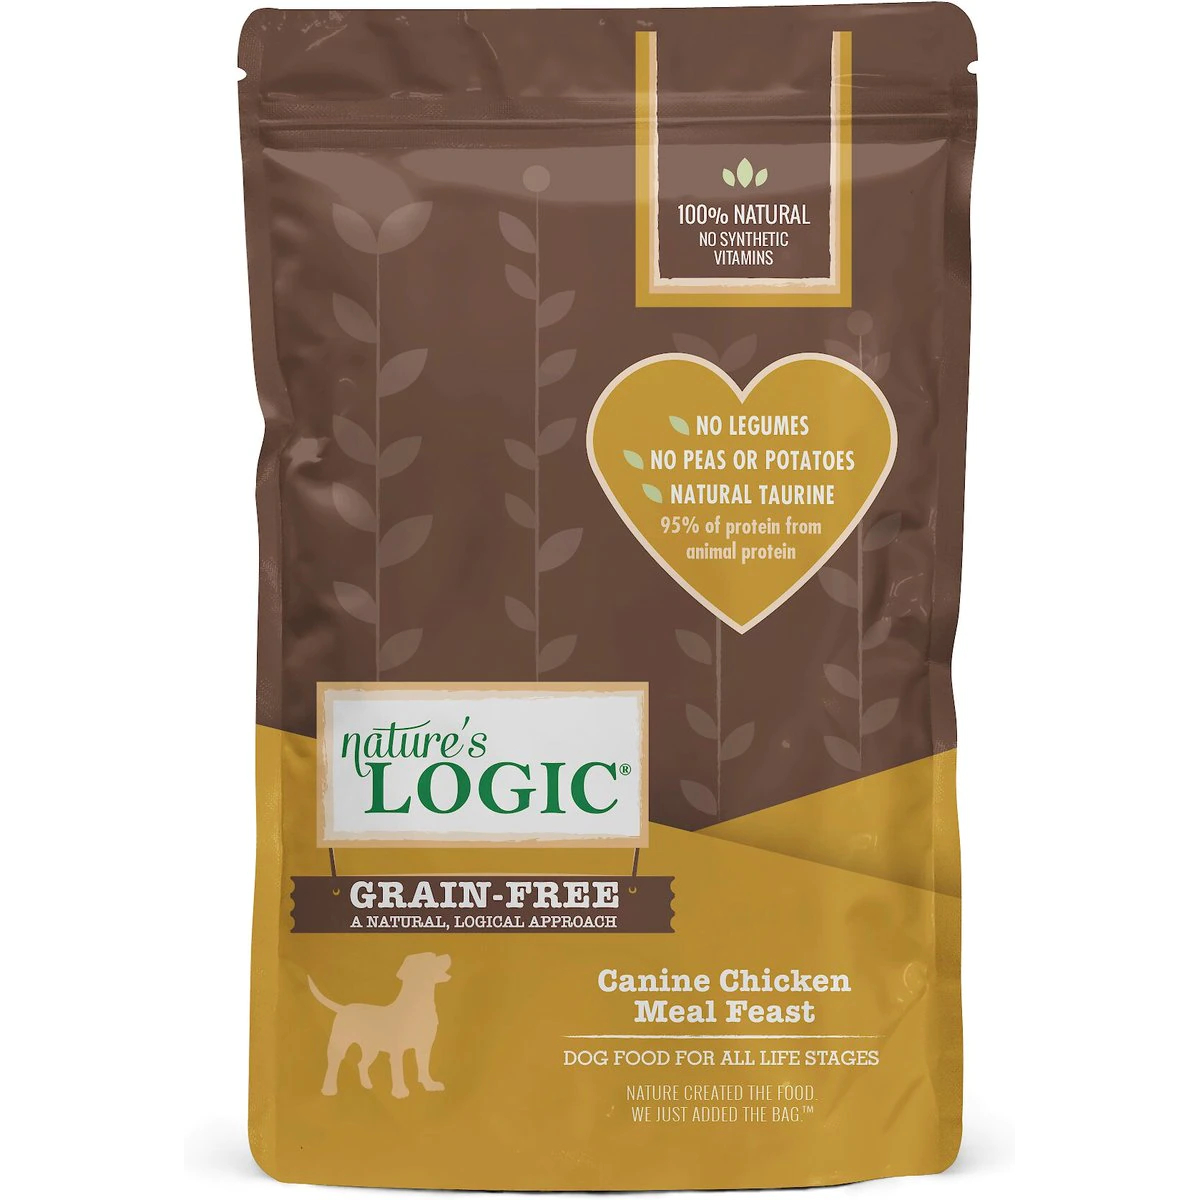 Nature's Logic Canine Chicken Meal Feast Grain-Free Dry Dog Food 